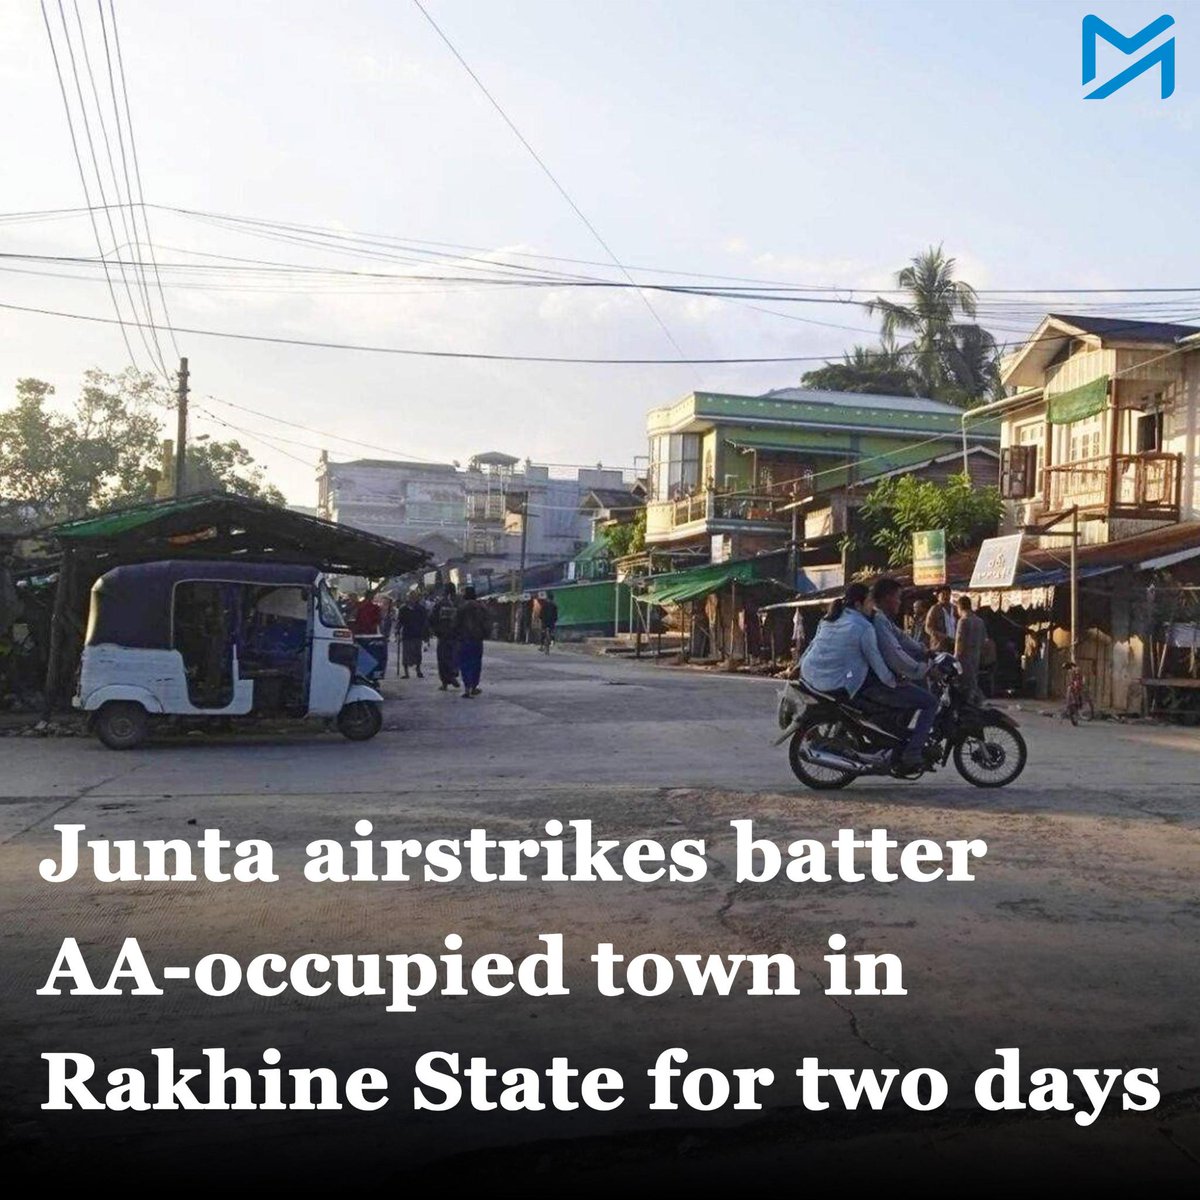 After previously fleeing the town and returning, Minbya residents said that further air raids might force them to leave again despite the difficult conditions in the countryside Read More : myanmar-now.org/en/news/junta-… #Myanmar #Rakhine